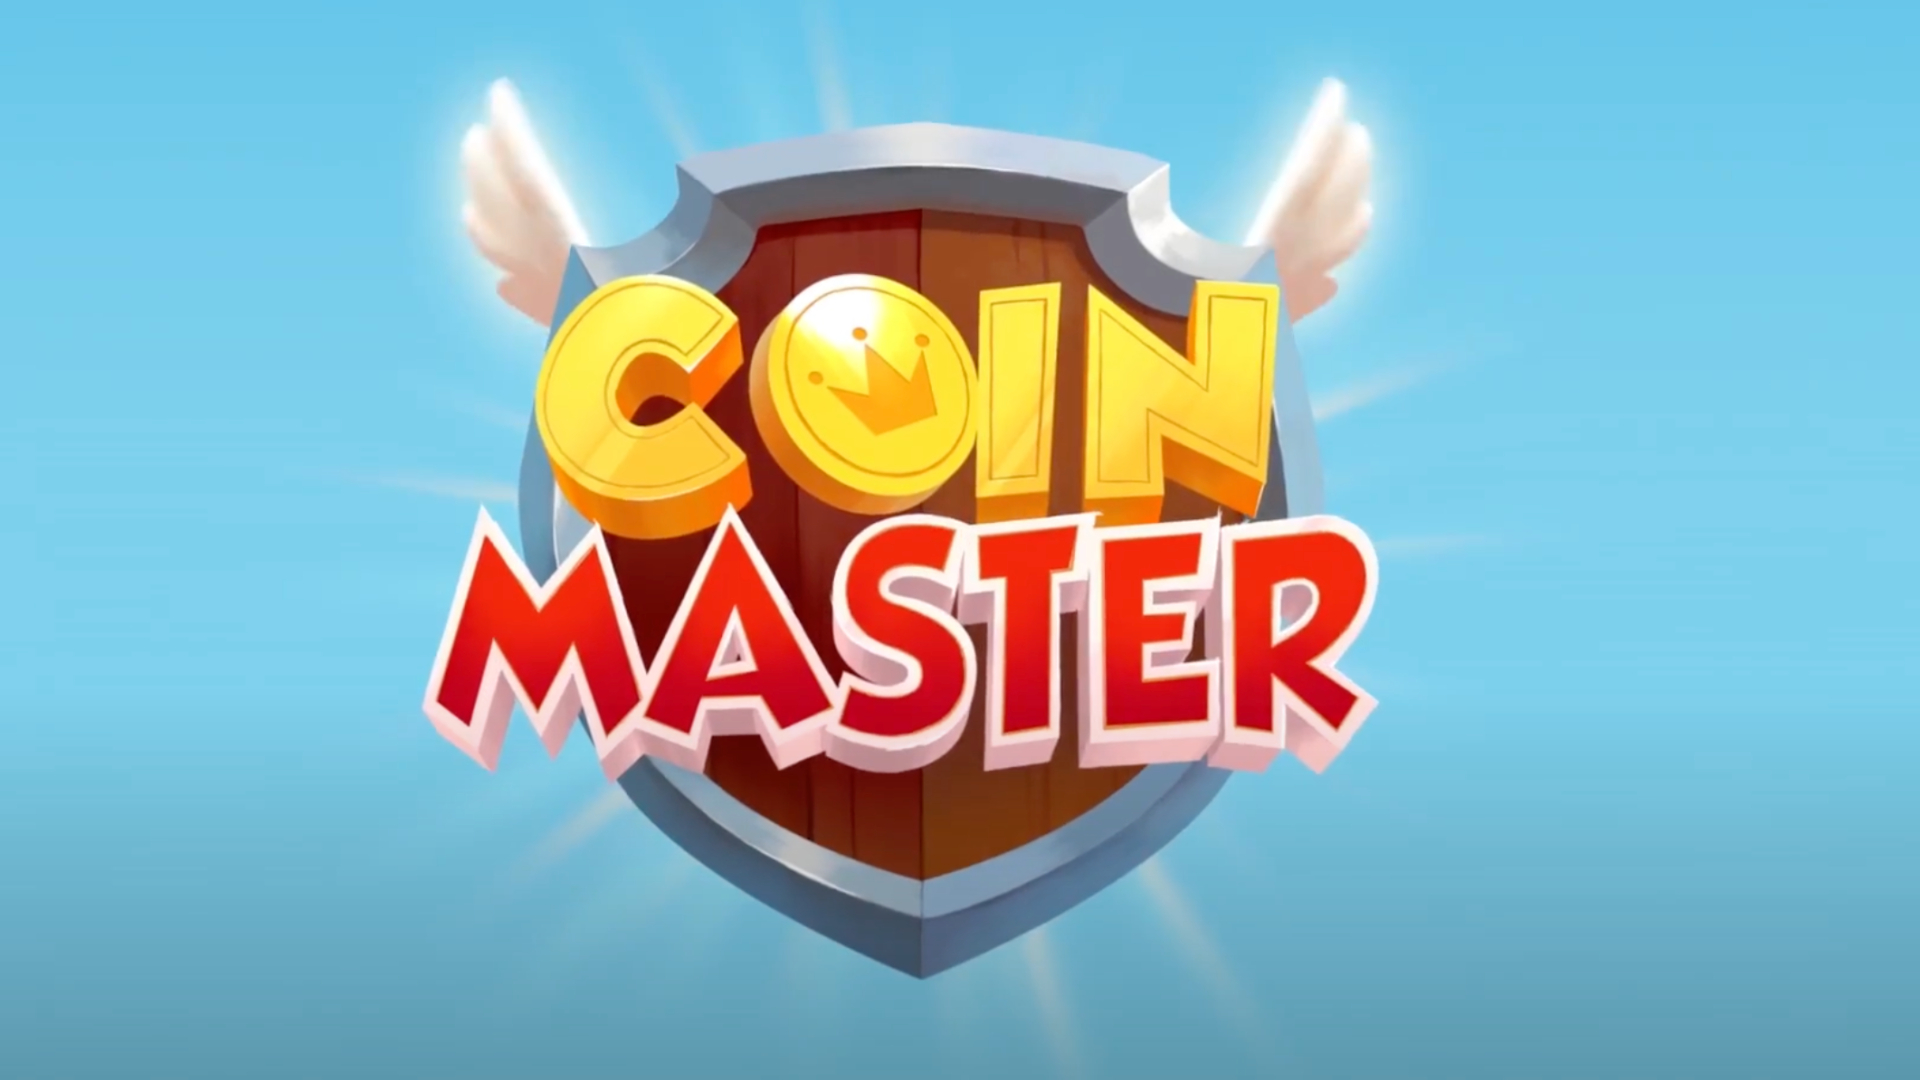 The Coin Master logo against a blue background